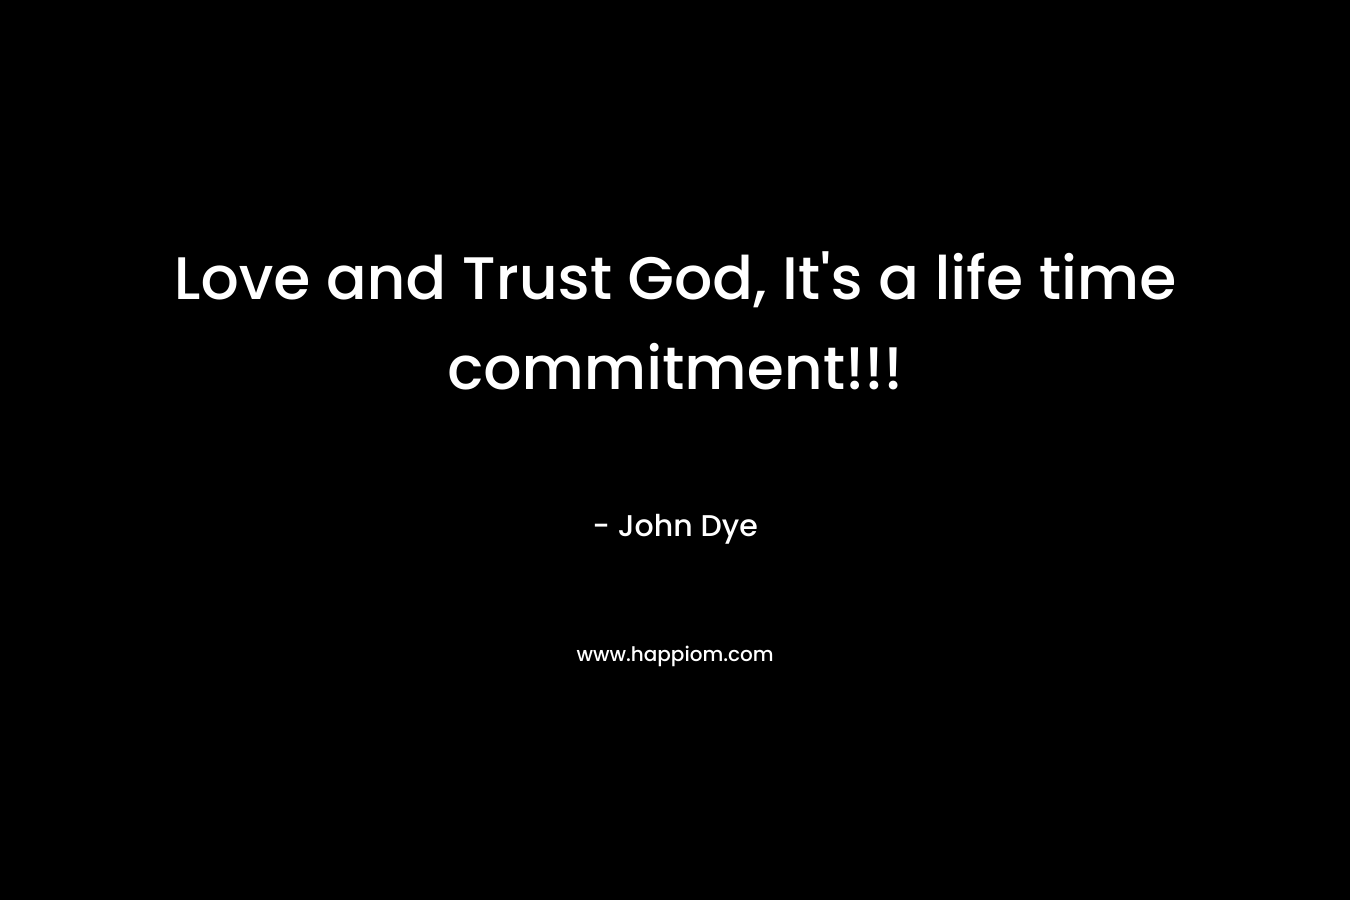 Love and Trust God, It's a life time commitment!!!